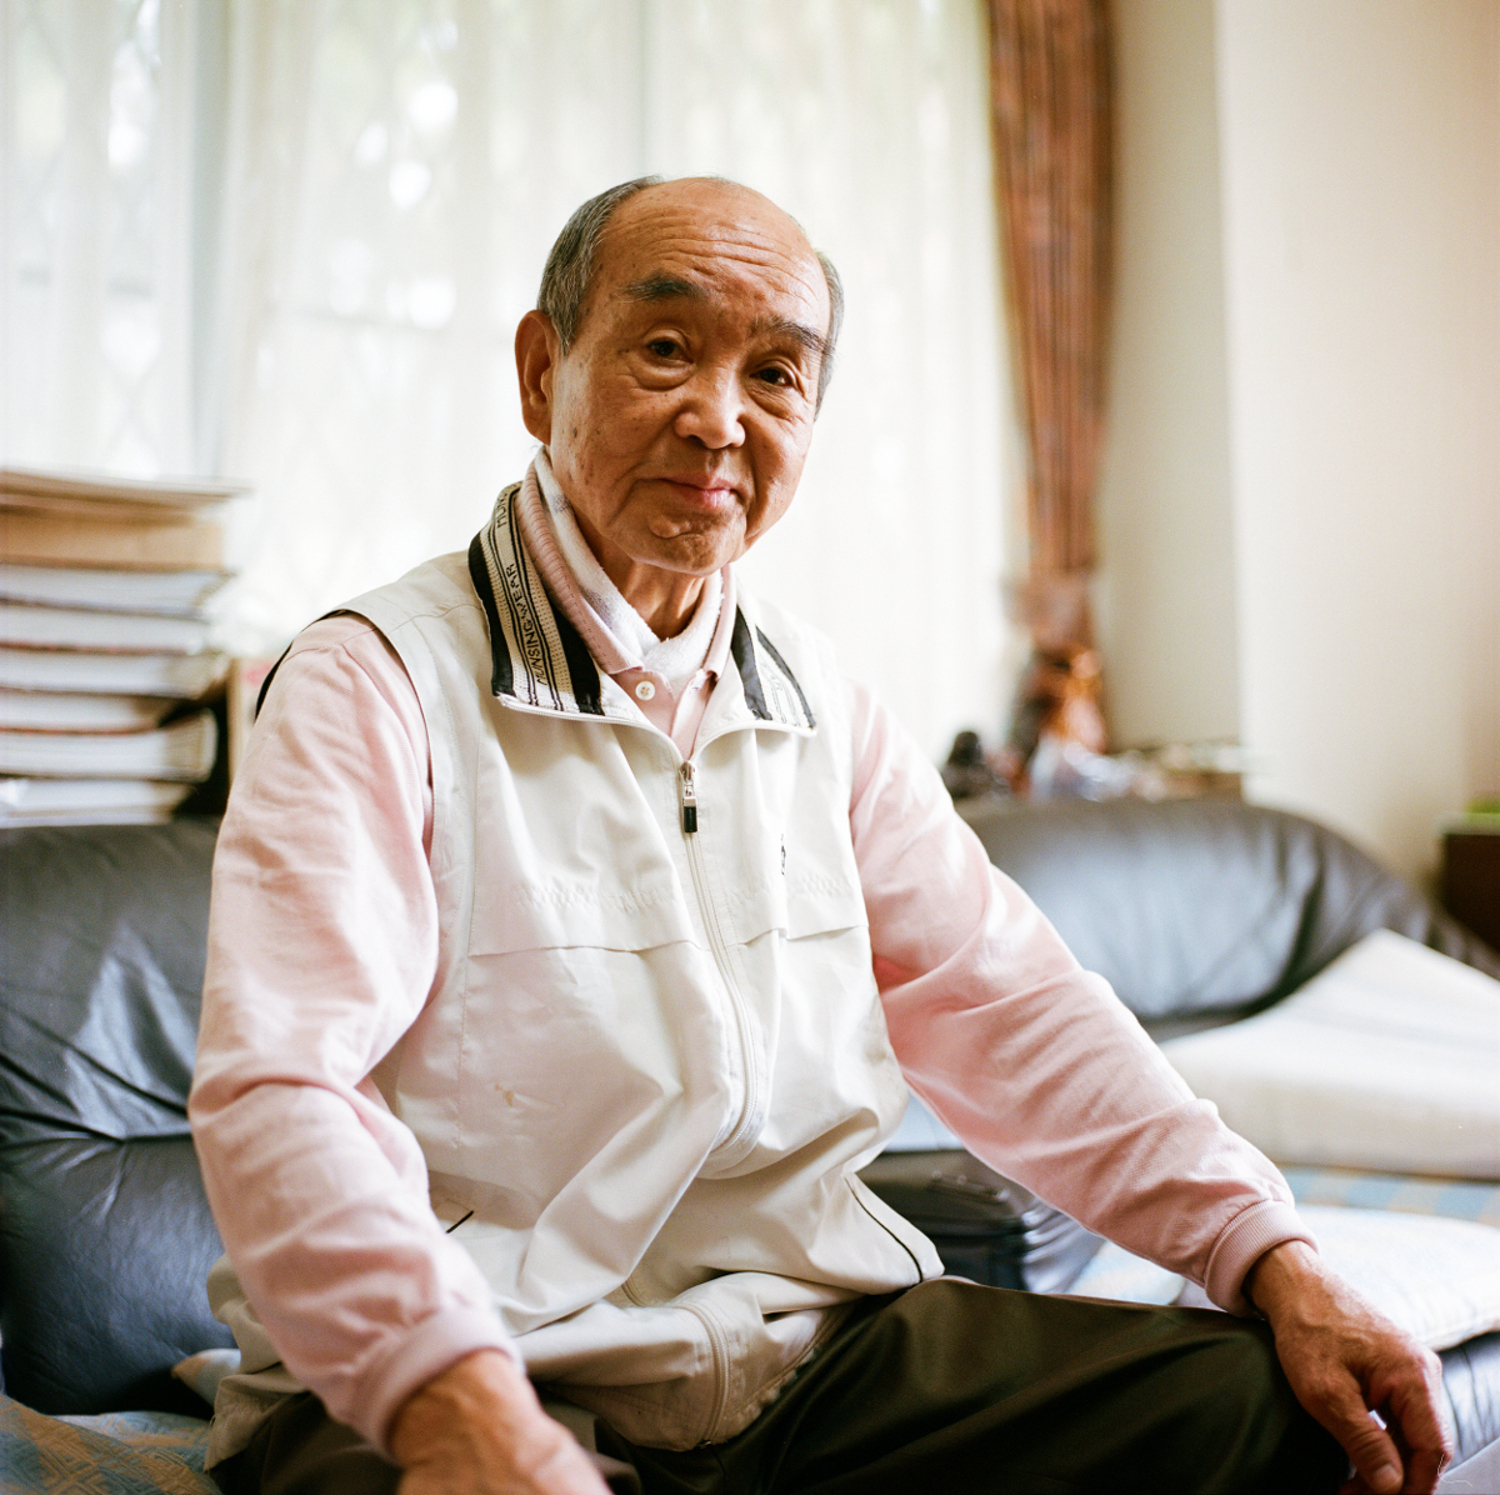  This man is Japanese but was born in China in 1928. He returned to Japan with his family after the Second World War. He is presently preparing to return to Naraha in the coming weeks, with his spouse. They are now fixing their home, damaged by humid